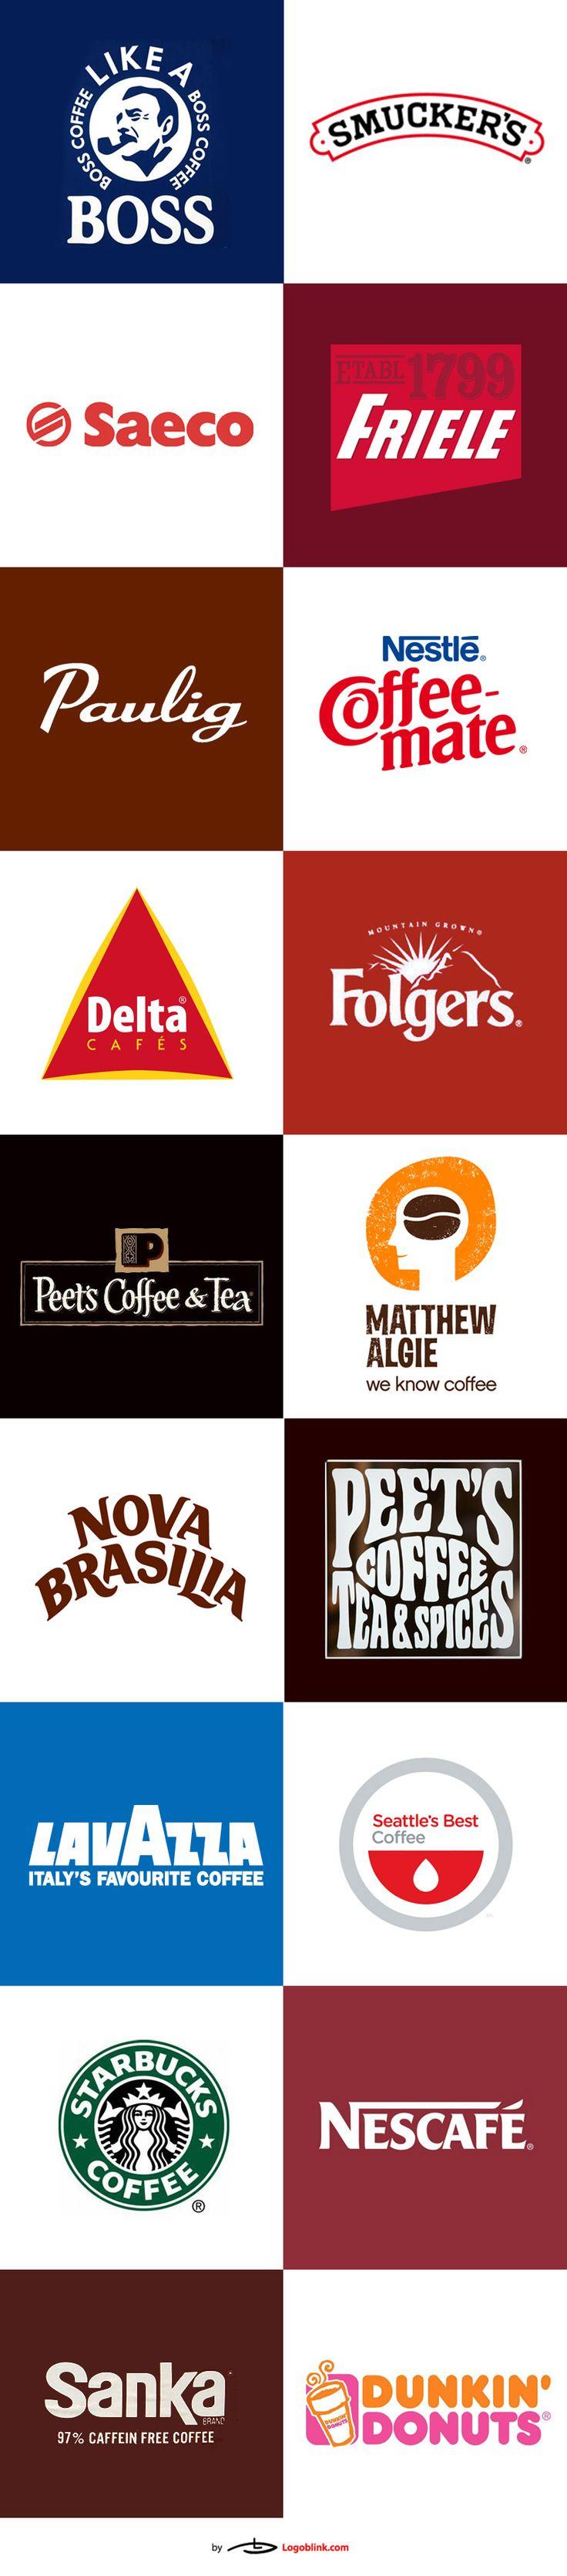 Famous Coffee Logo - 36 Famous coffee logos from around the world - Logoblink.com